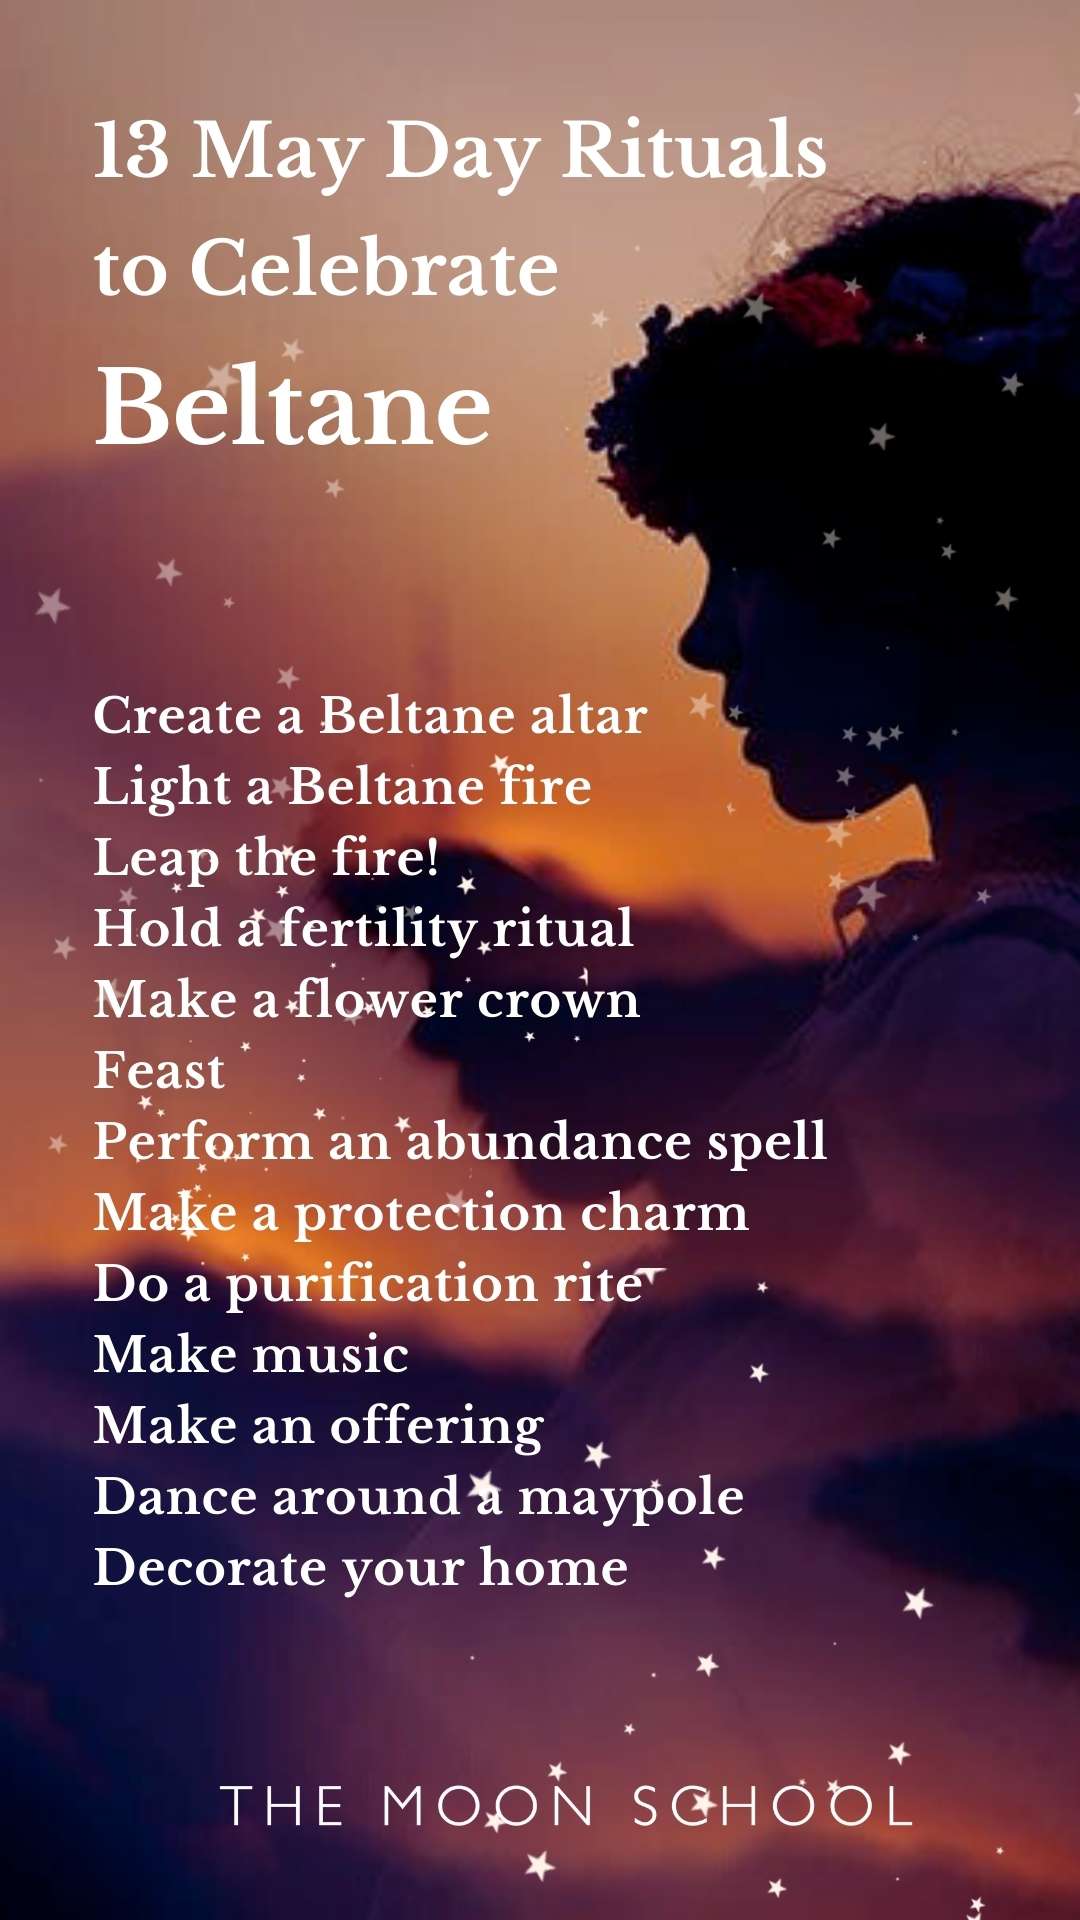 List of 13 Rituals to Celebrate Beltane